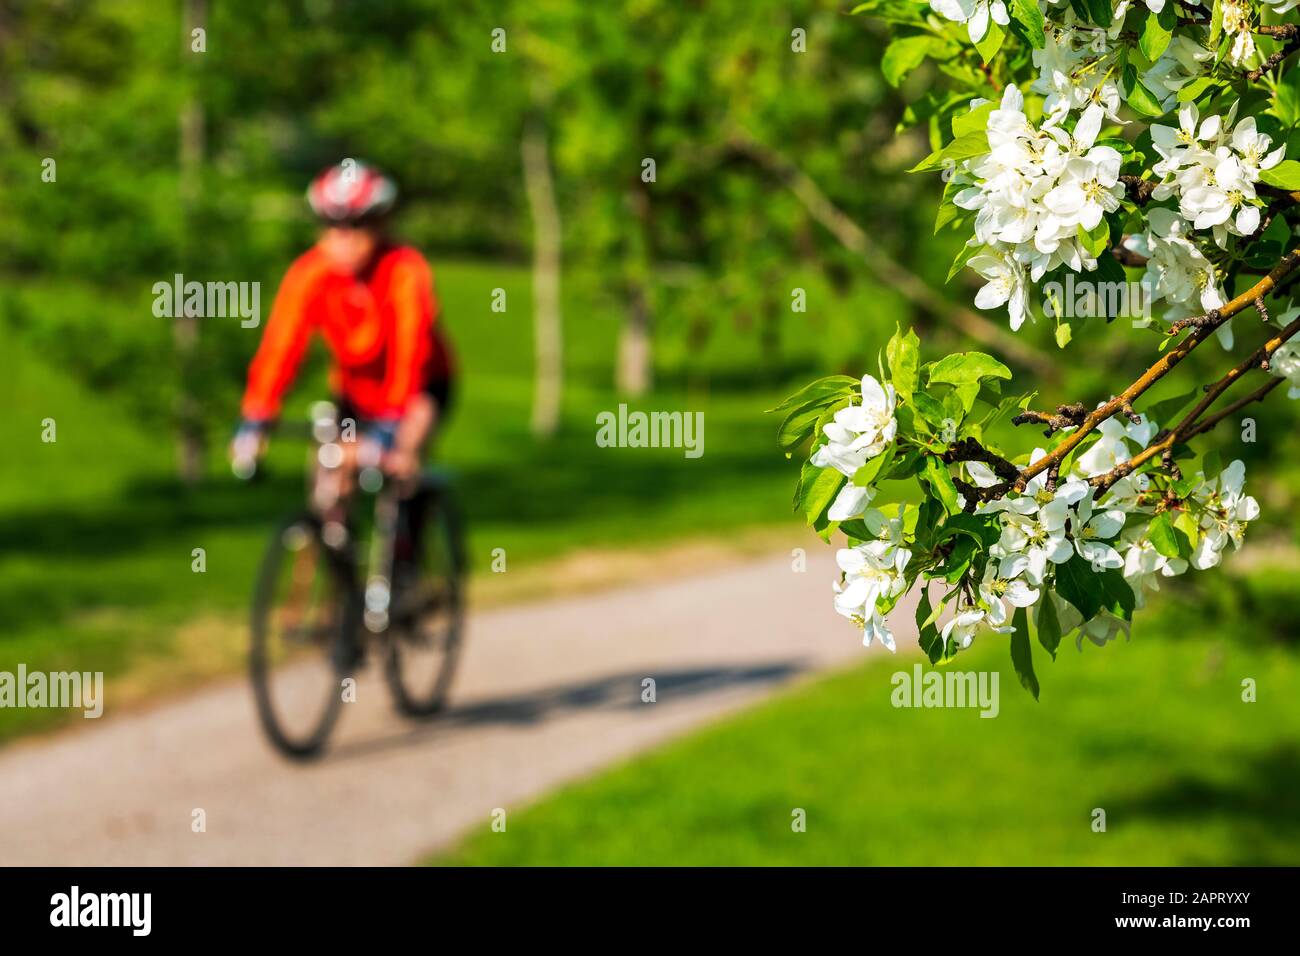 Female cyclist along pathway with apple blossoms framing the foreground ; Calgary, Alberta, Canada Stock Photo